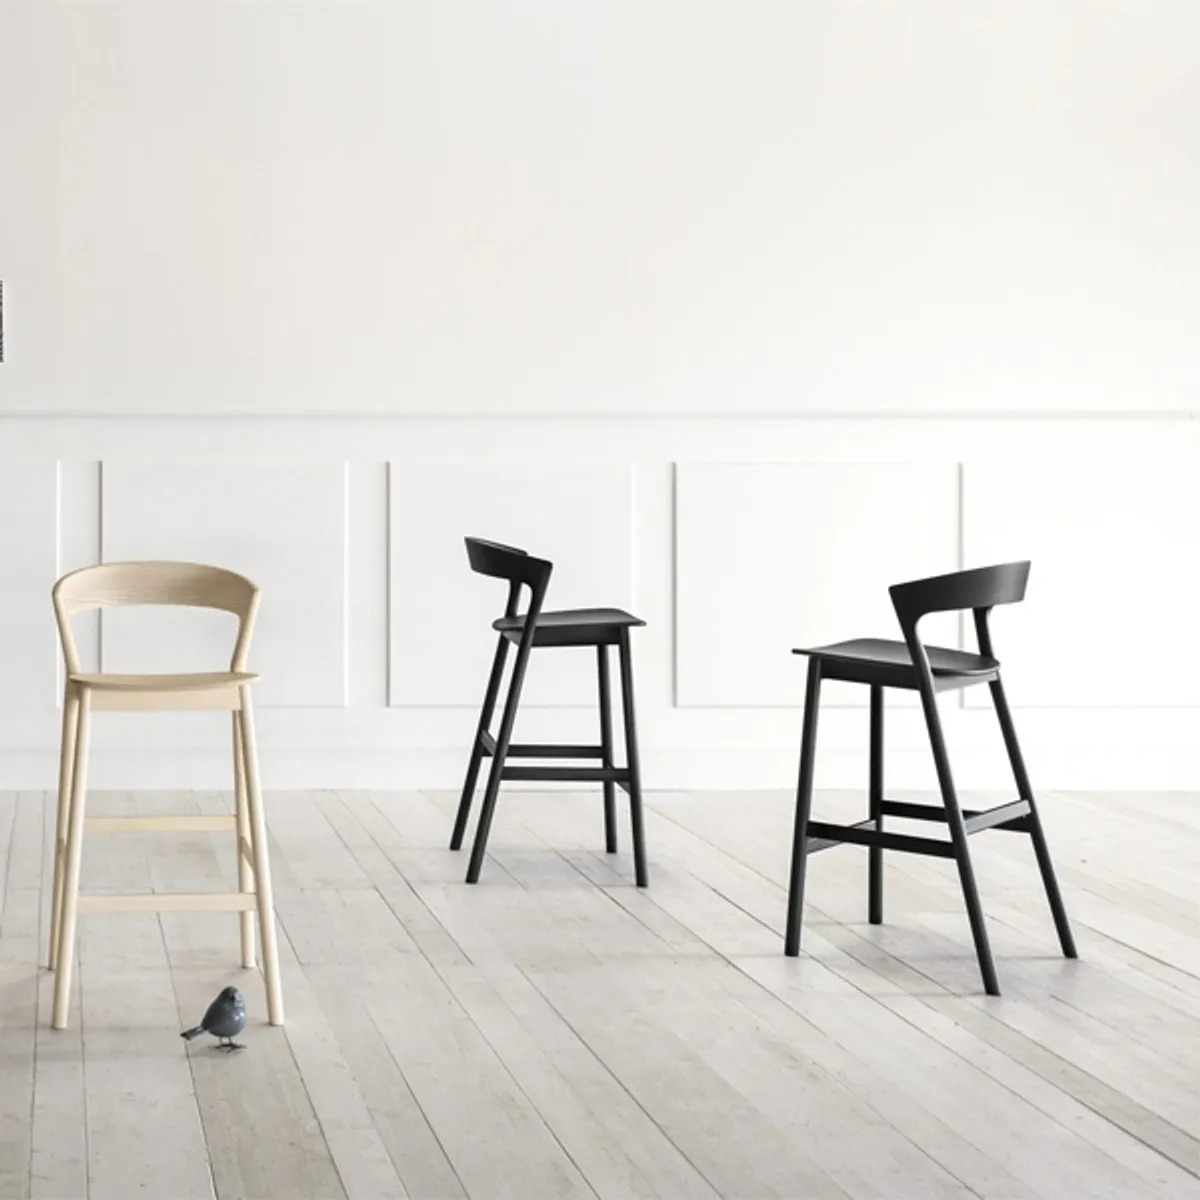 Thora wood bar stool Inside Out Contracts7